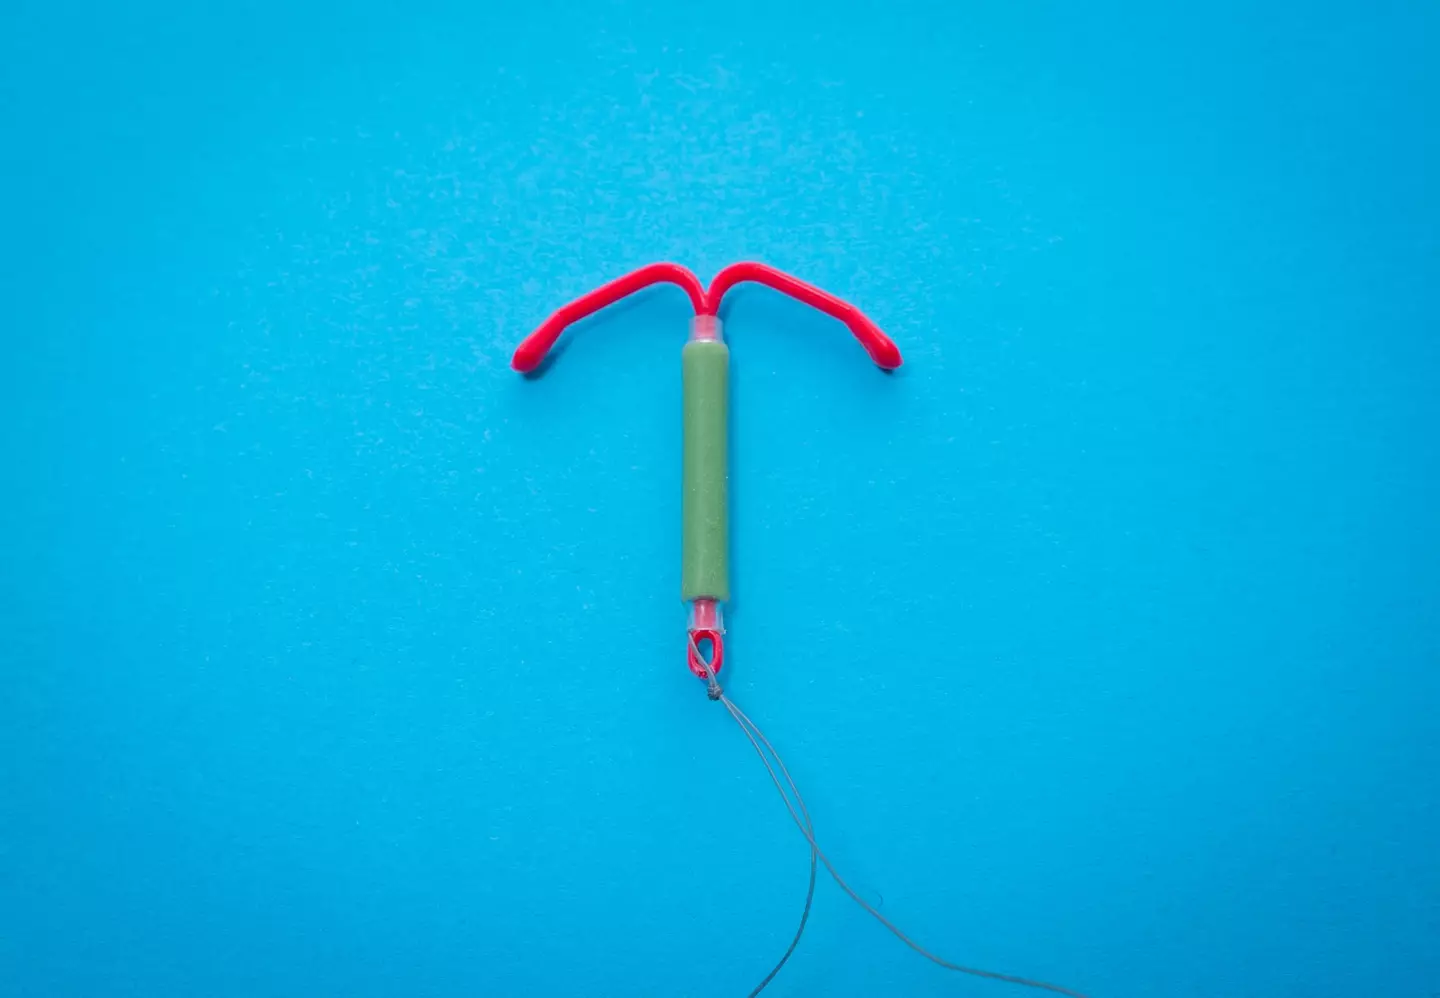 Just in case you're not sure, an IUD is a form of contraception for those with vulvas (Unsplash Reproductive Health Supplies Coalition).